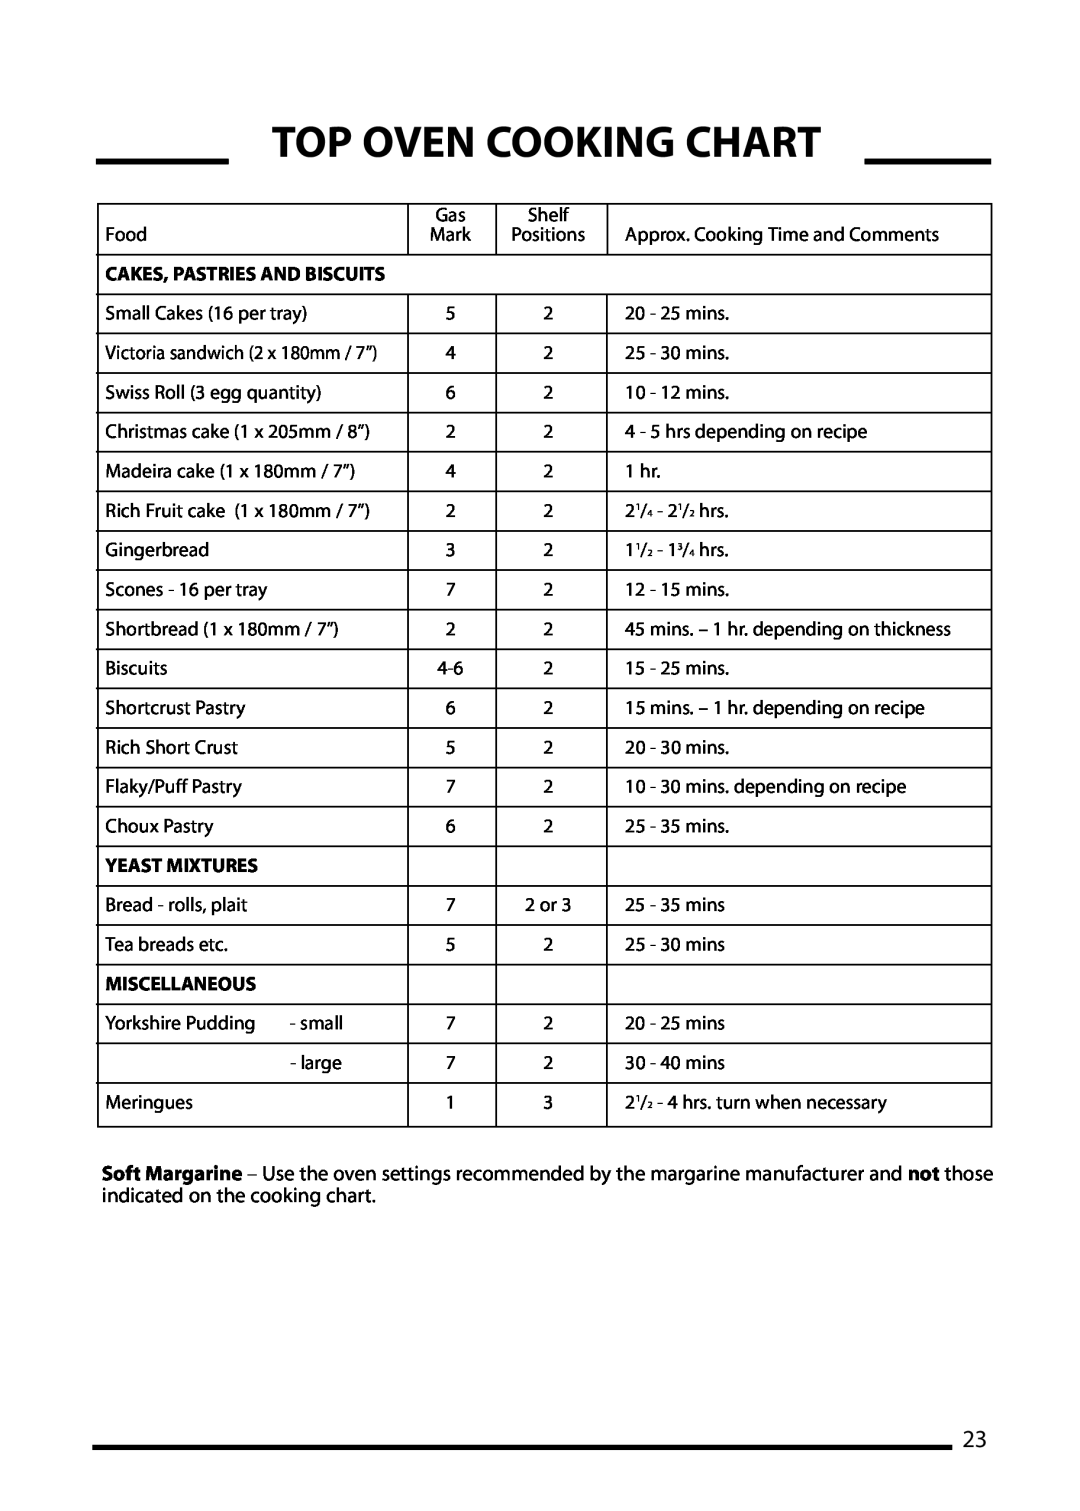 Cannon 10410G, ICON 600 installation instructions Top Oven Cooking Chart, Yeast Mixtures, Miscellaneous 